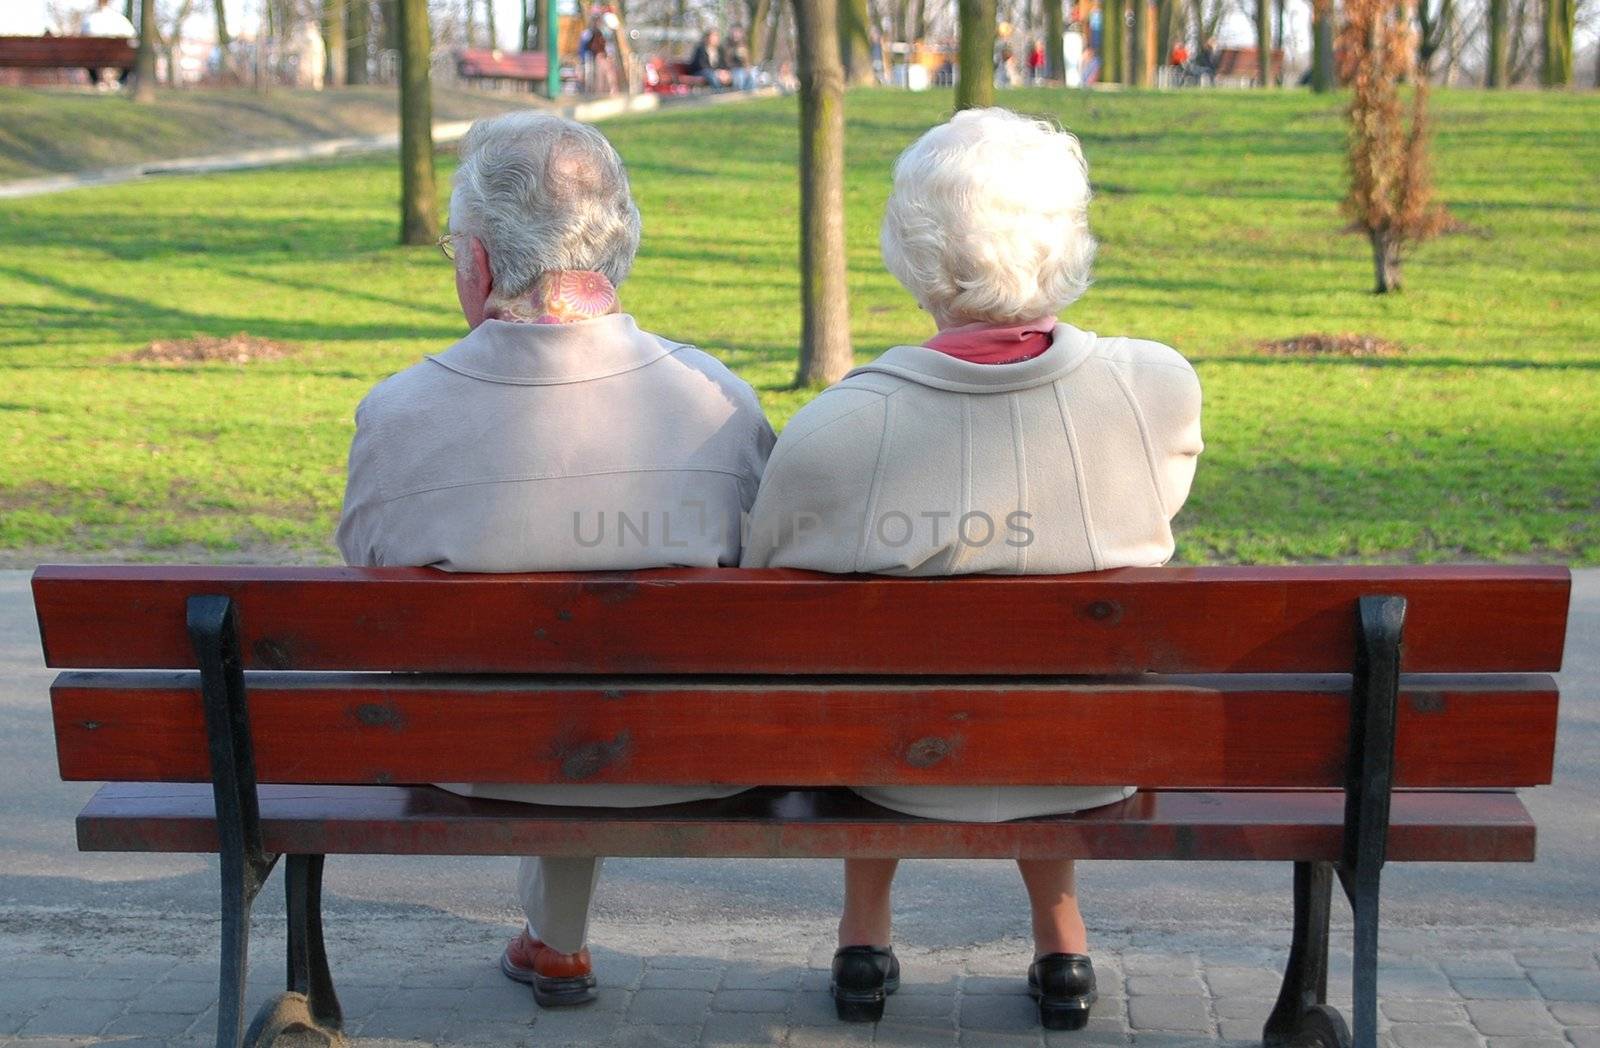 A couple of seniors sitting on a bench in the park